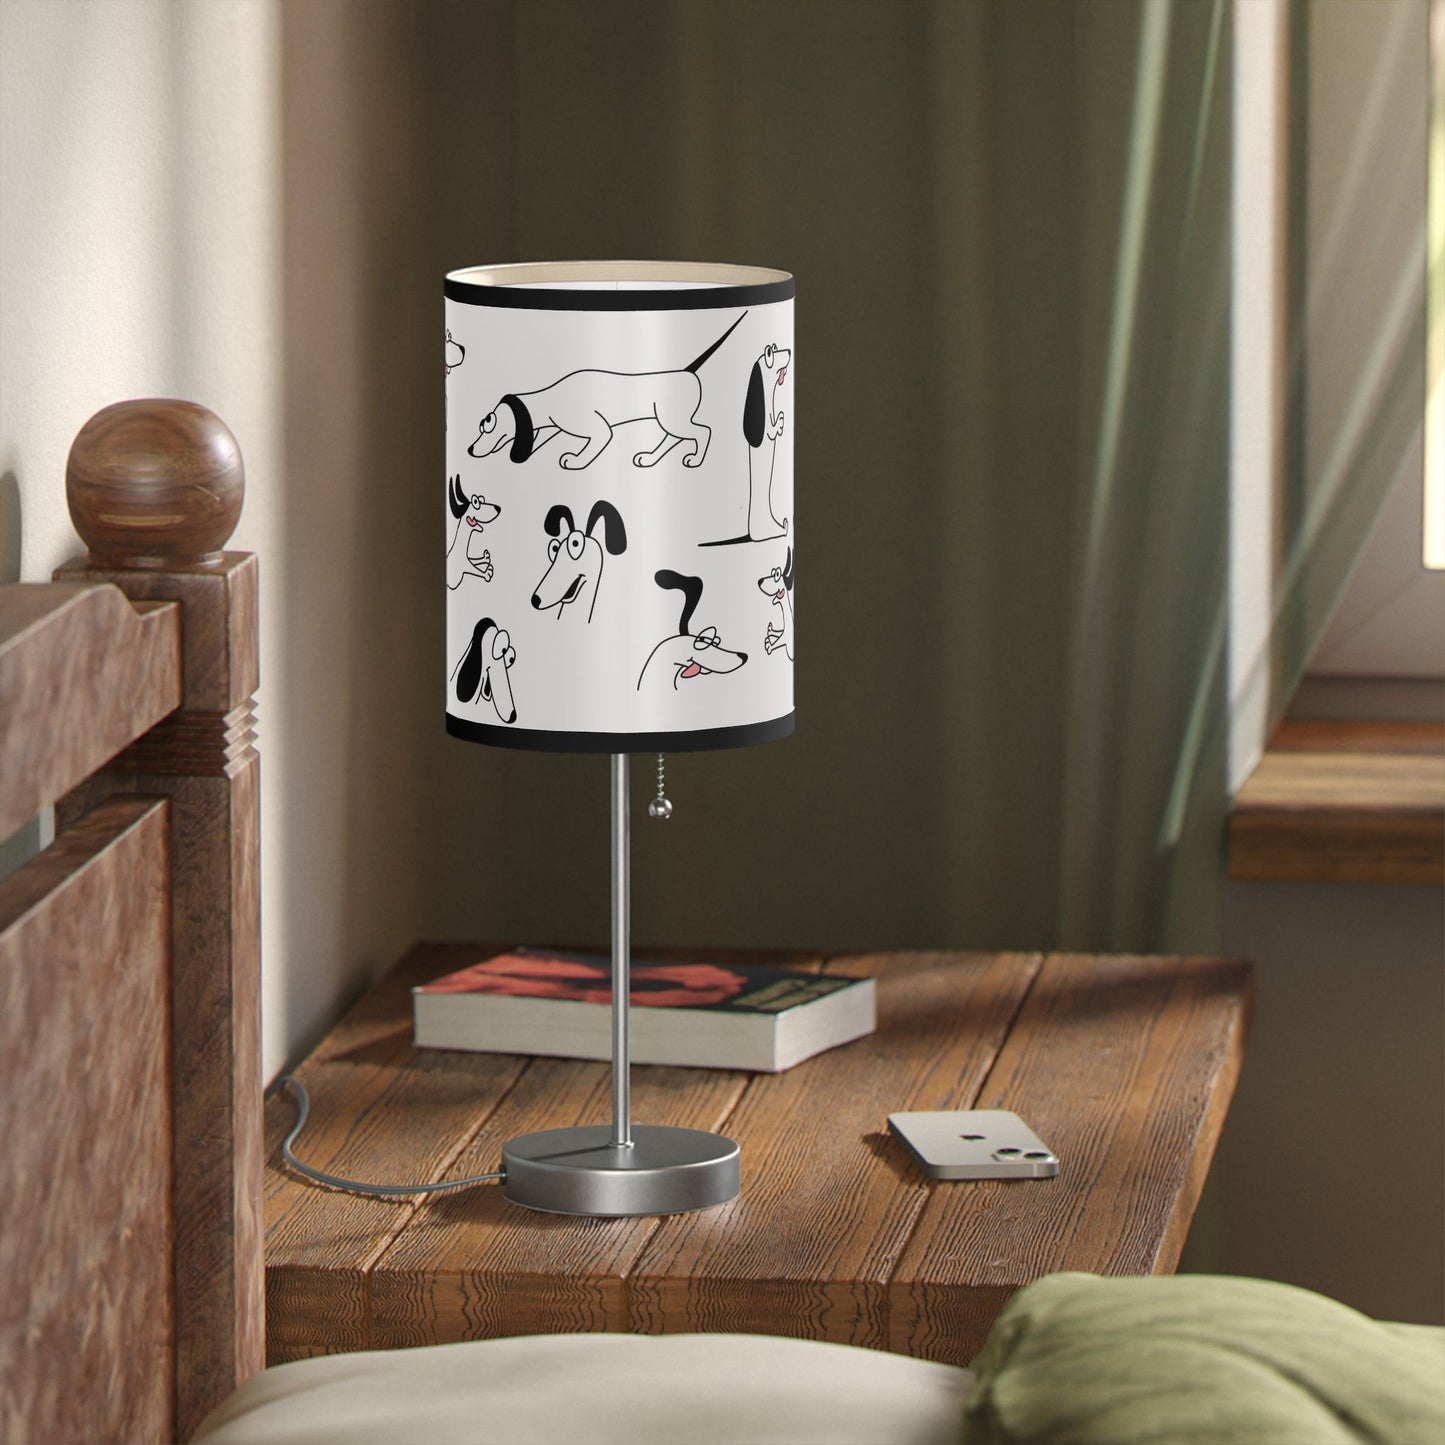 Playful Dog Lamp, Black and White Line Drawings of Dogs Accent Desk Lamp, Lamp Art - FlooredByArt